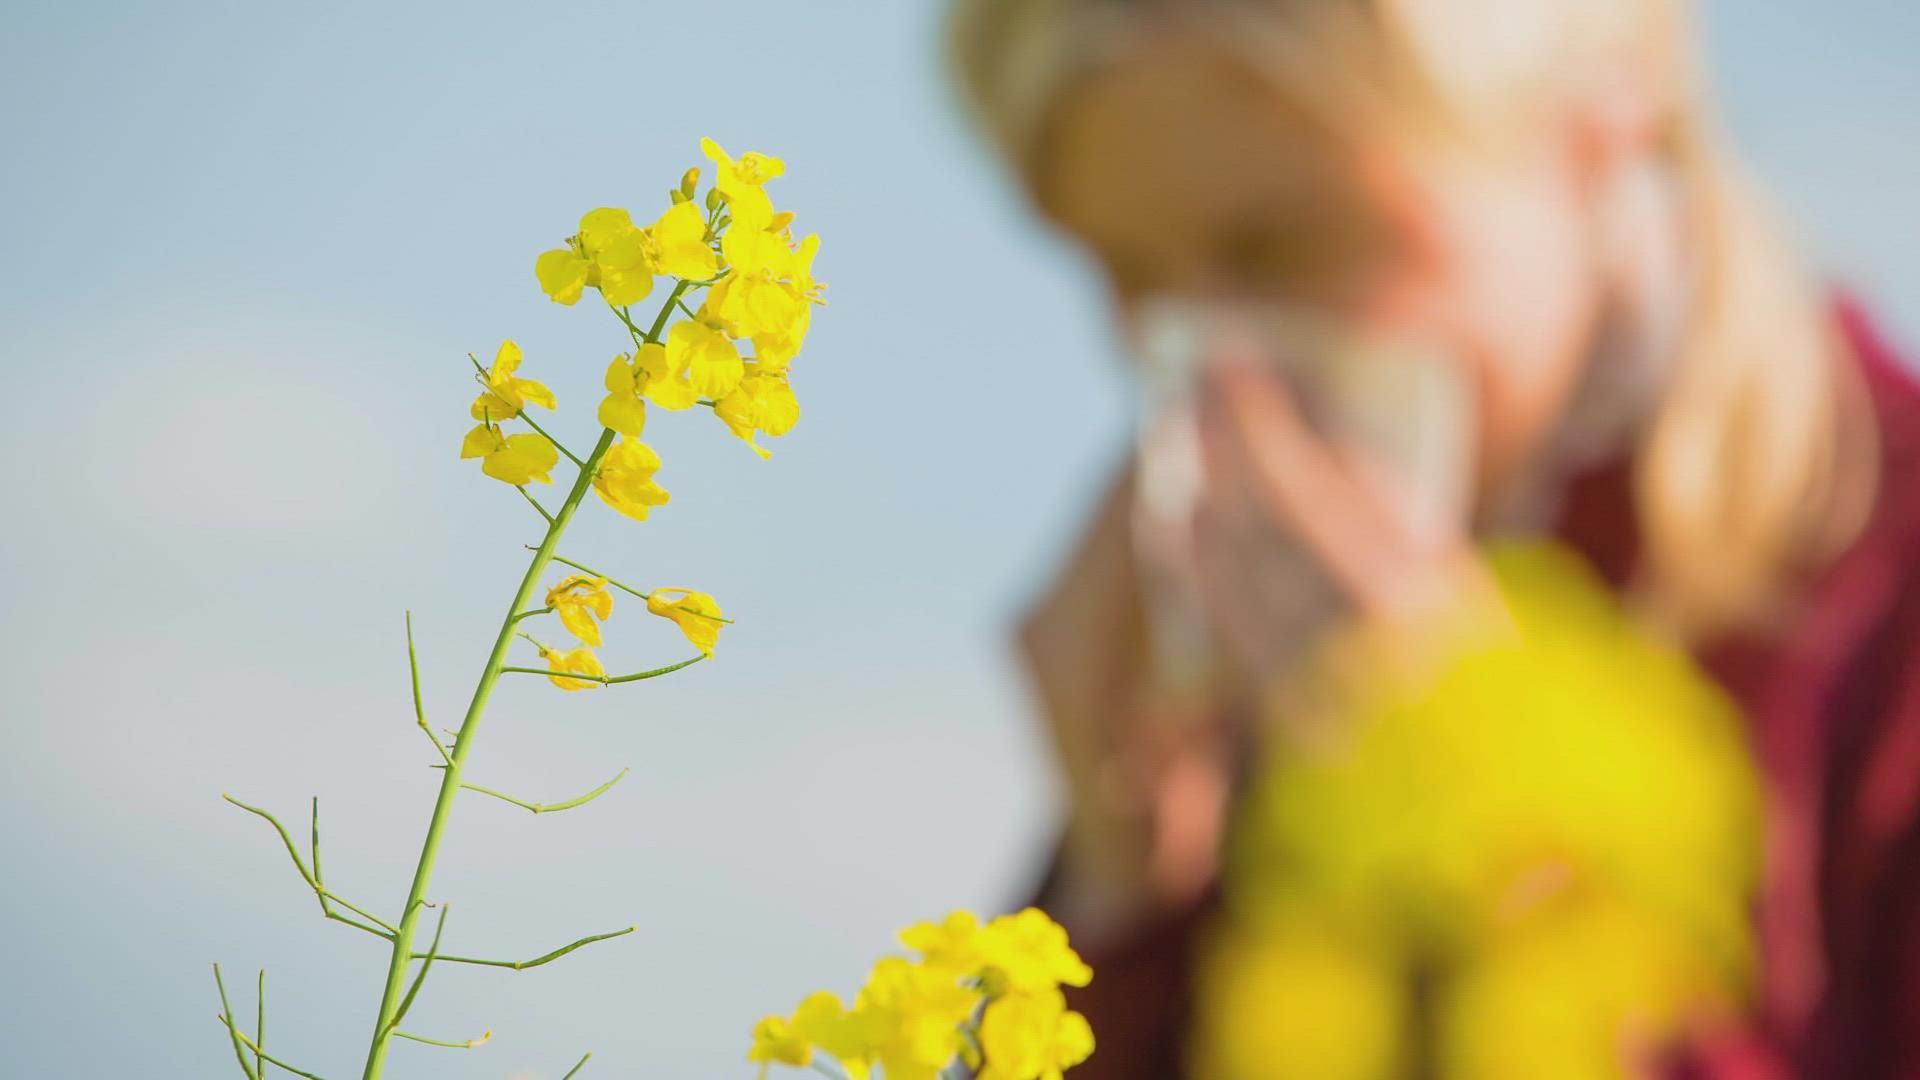 Most of the year is filled with cedar, ragweed and a variety of other allergens to keep us sneezing all your long.